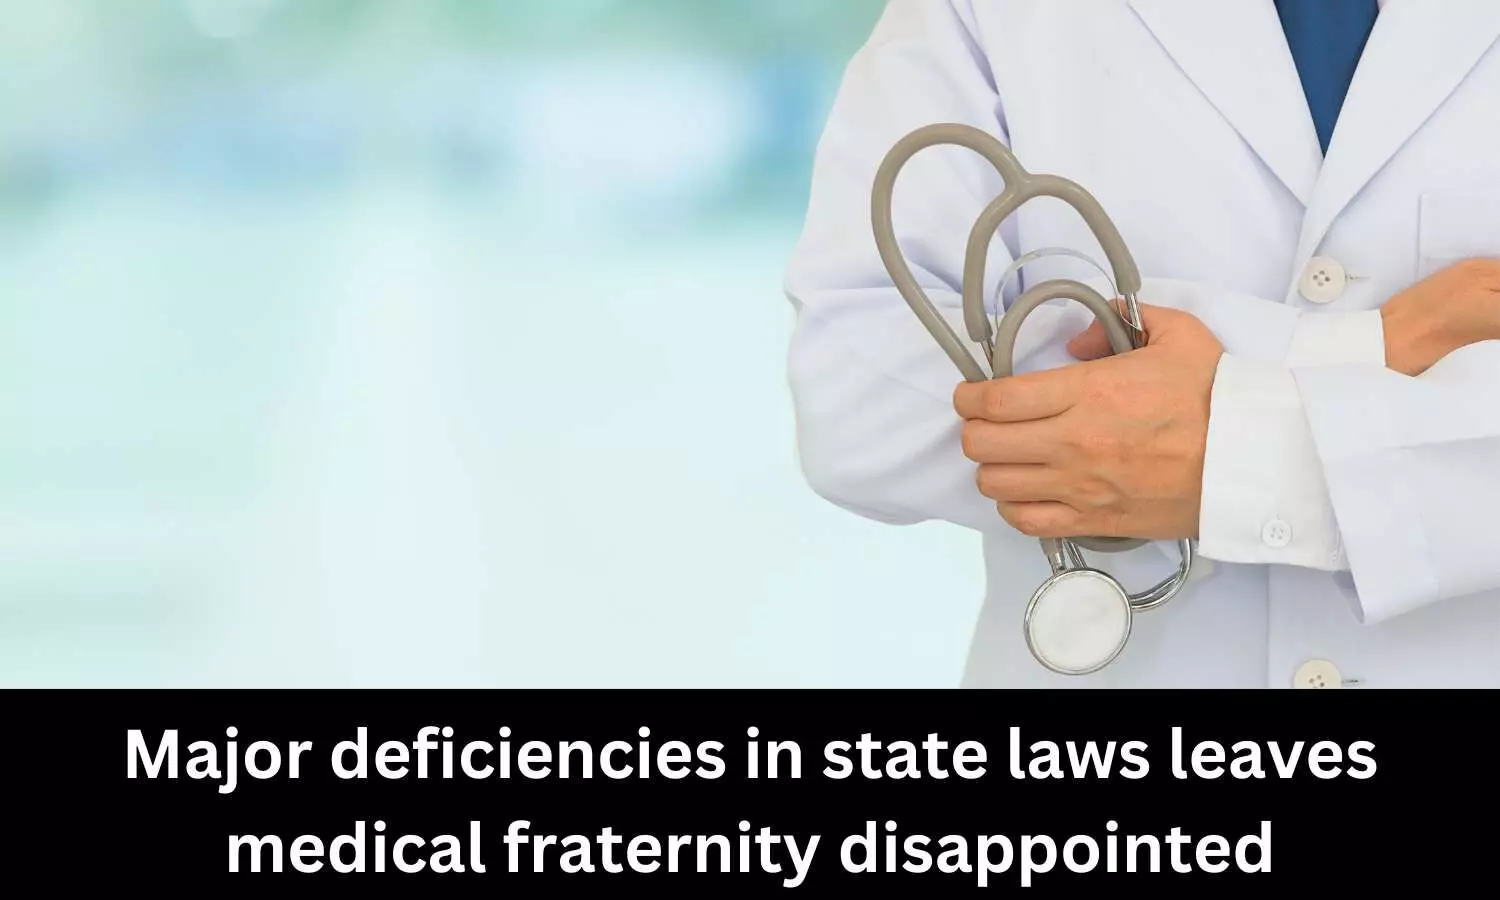 Glaring deficiencies in state laws leaves medical fraternity disappointed